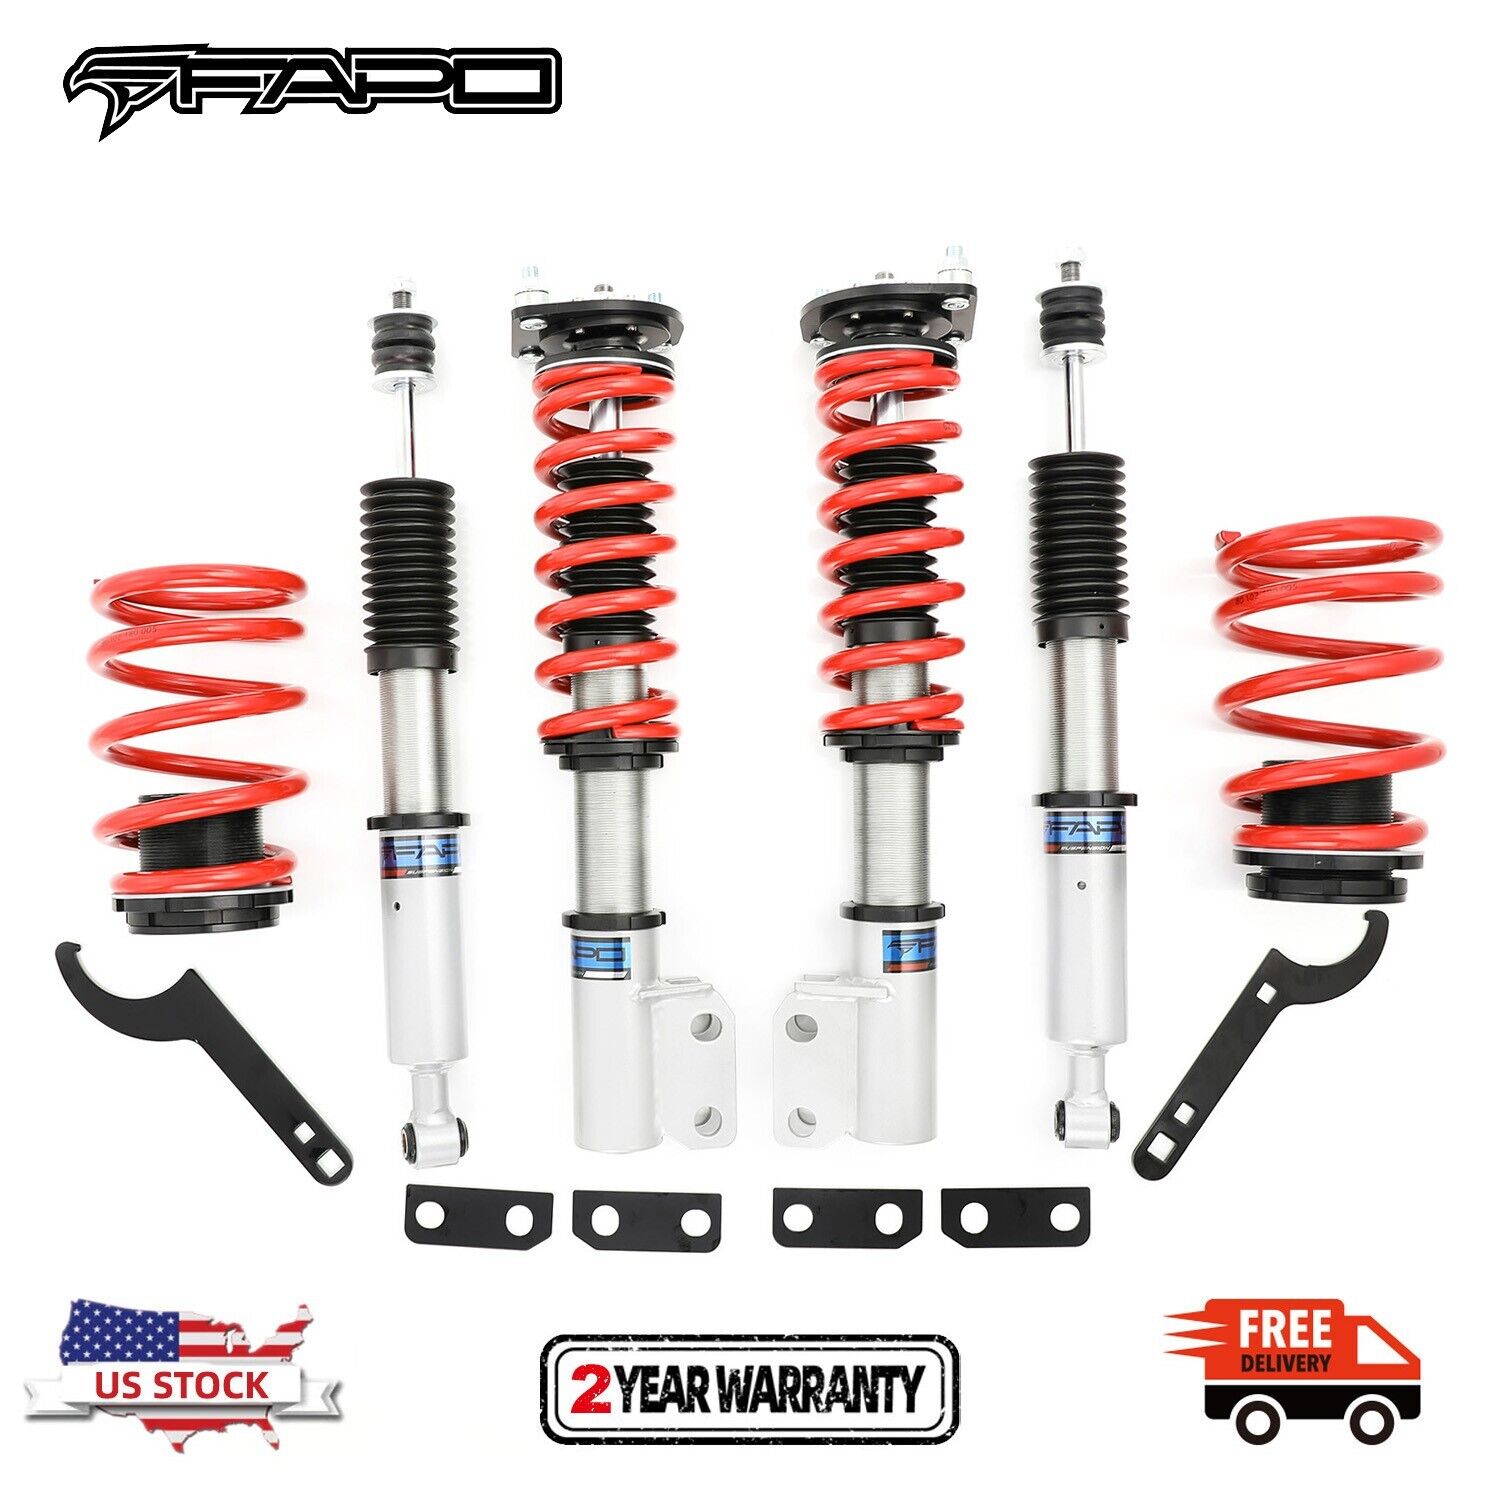 FAPO Coilovers For 1994-2004 Ford Mustang Struts Adjustable Height Suspension